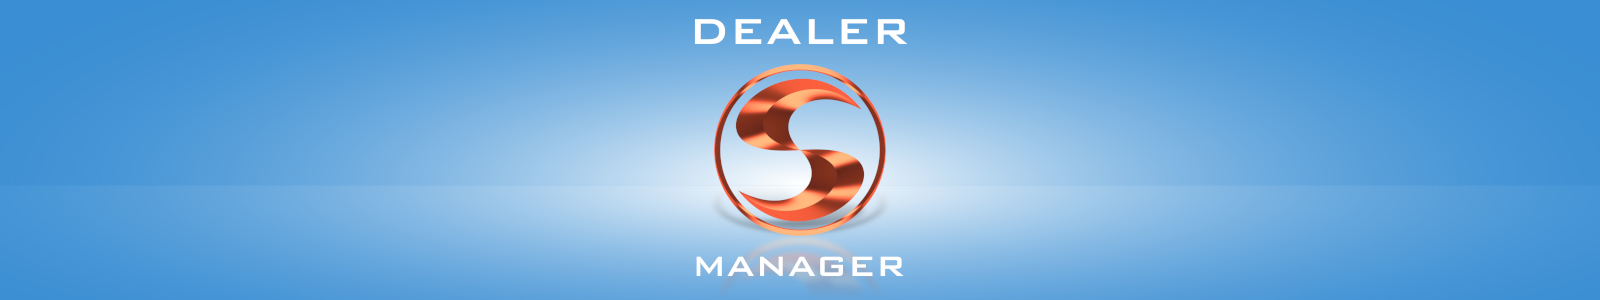 Dealer Manager - program for sellers of windows and doors